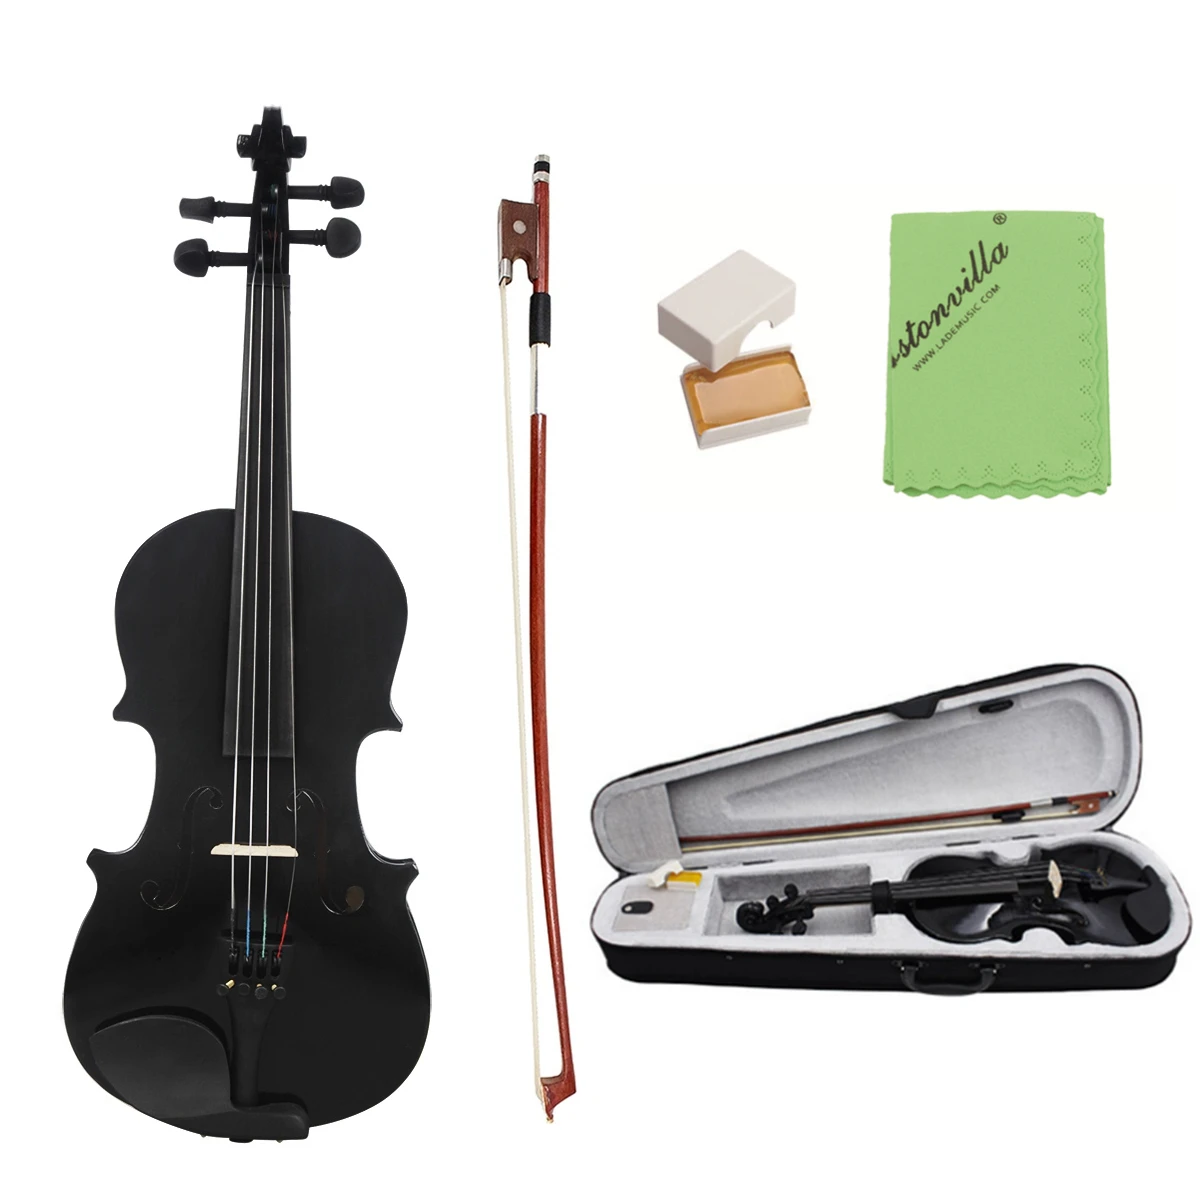 New 3/4 Size Perfect Black Violin/Fiddle W/Case & Bow & Rosin for Beginner 